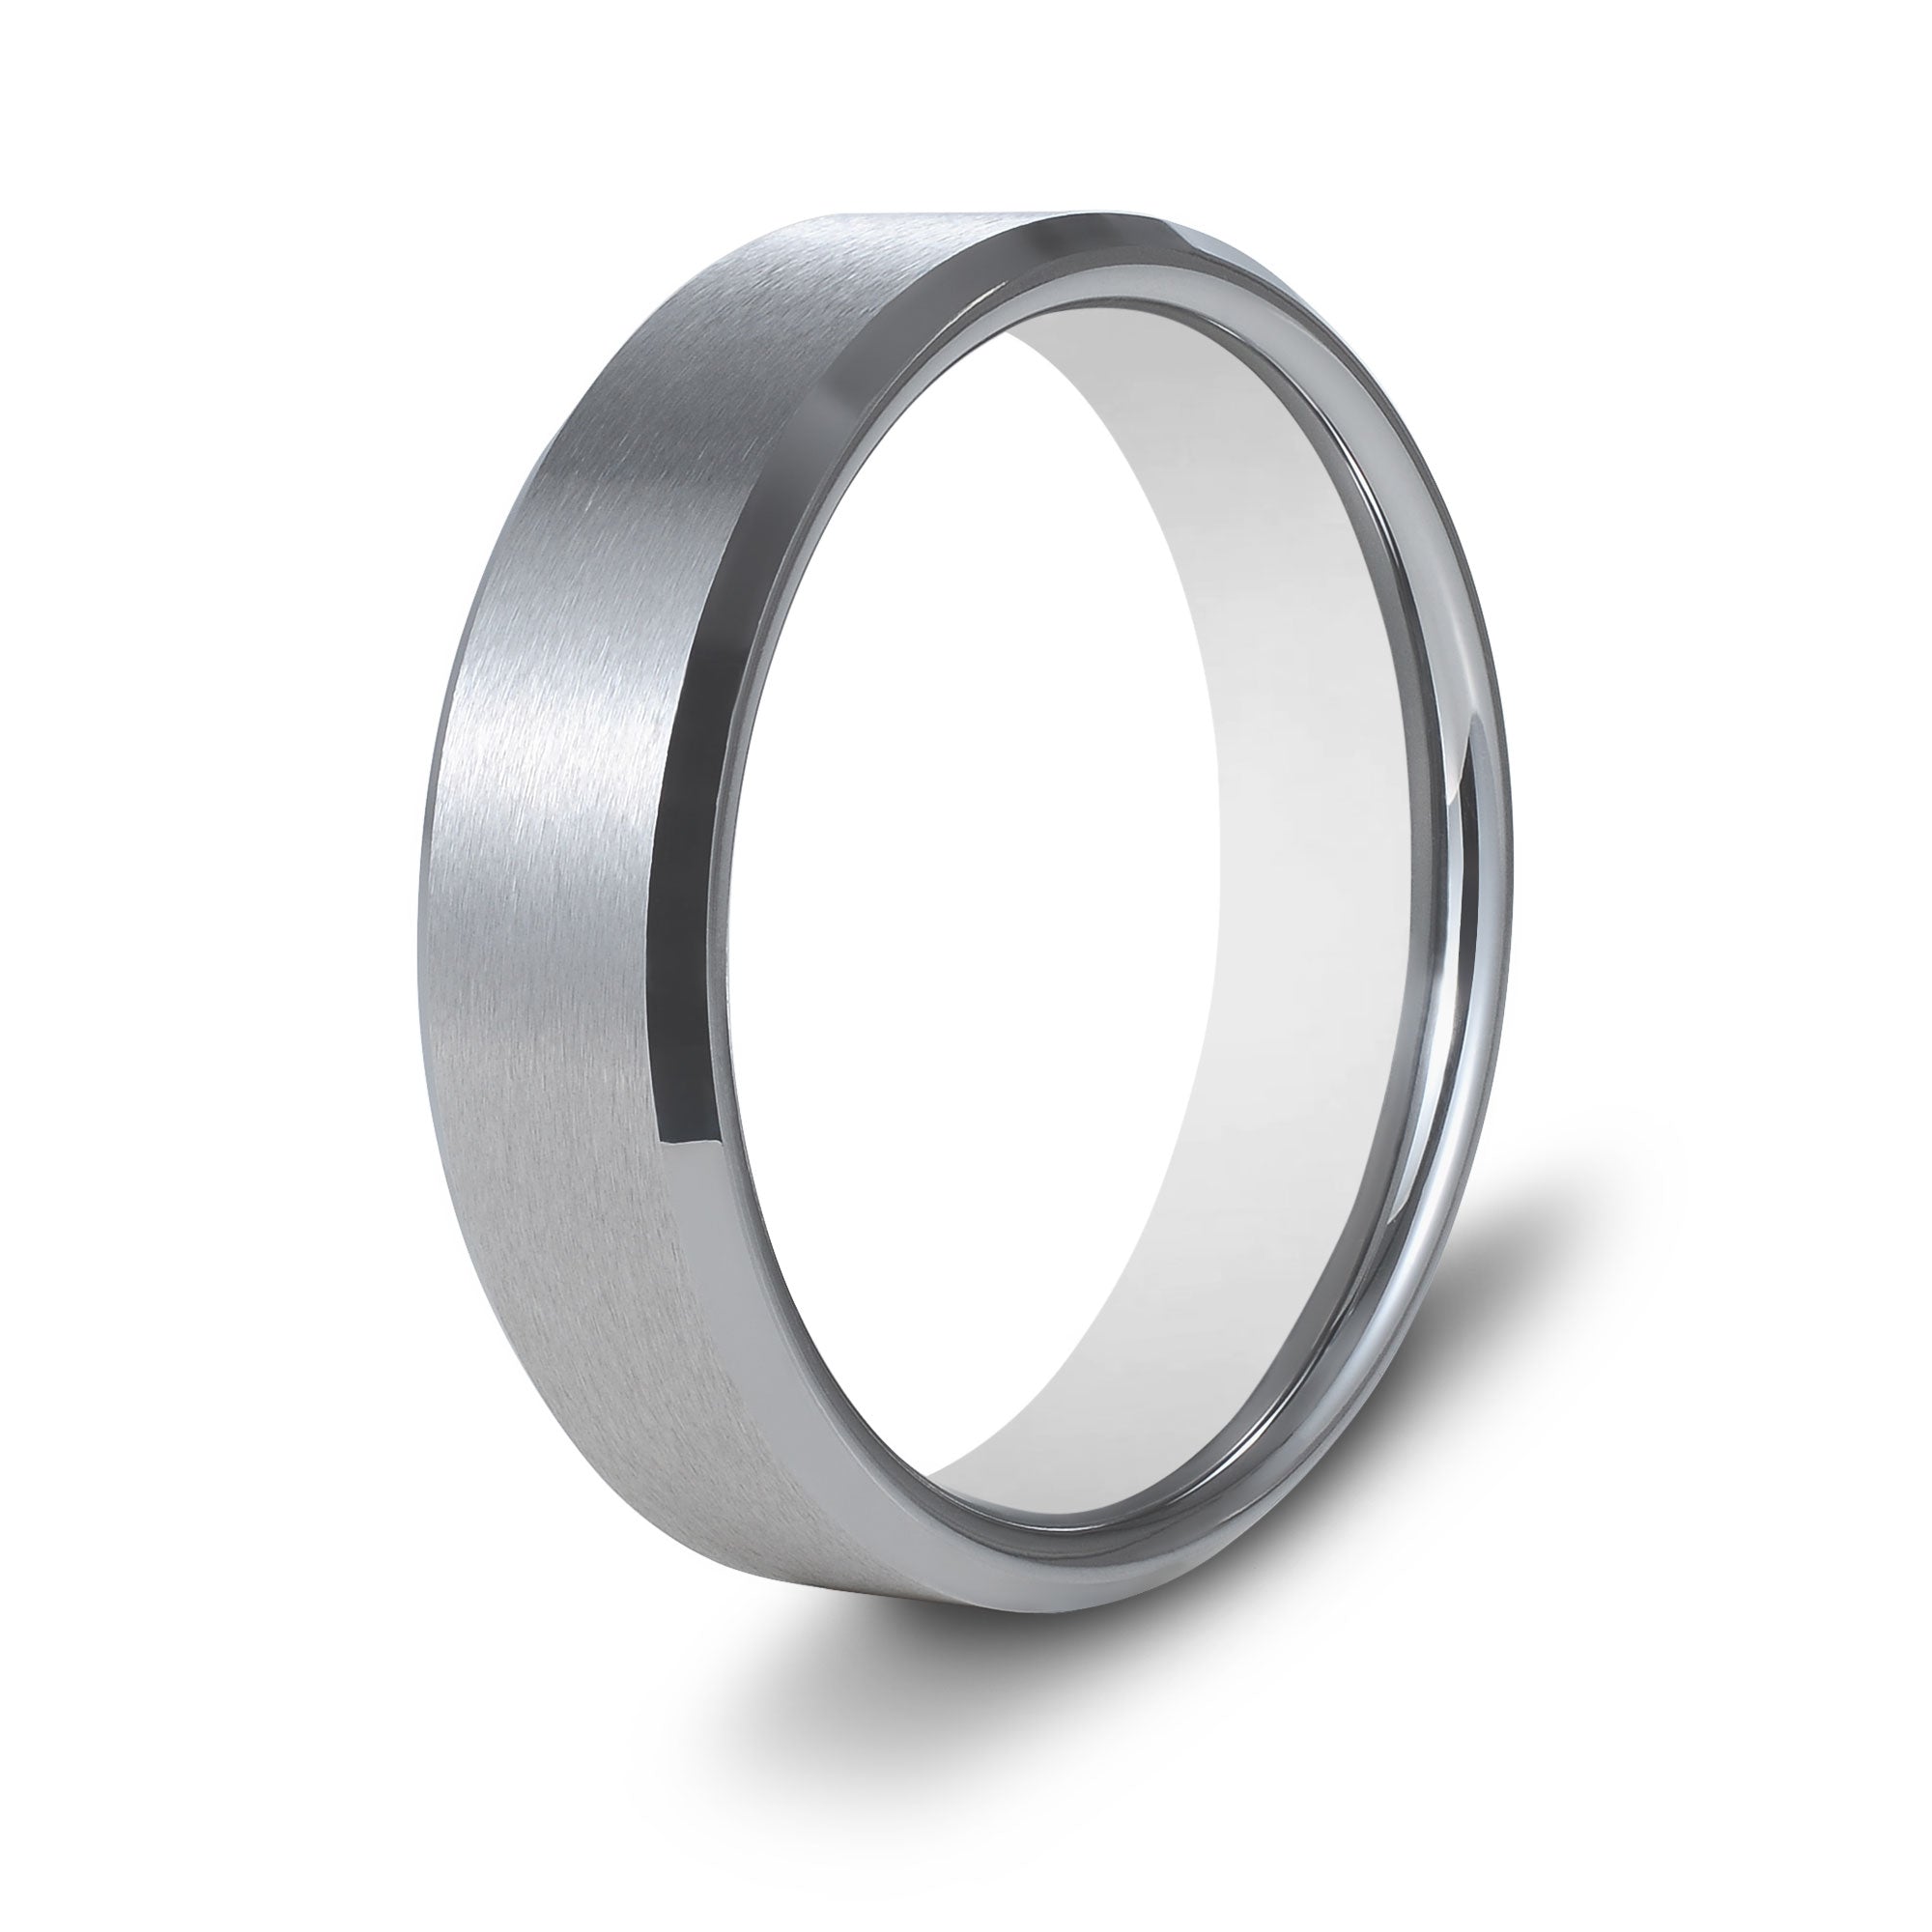 The Silver Knight - Silver 6mm Brushed Tungsten Beveled Ring